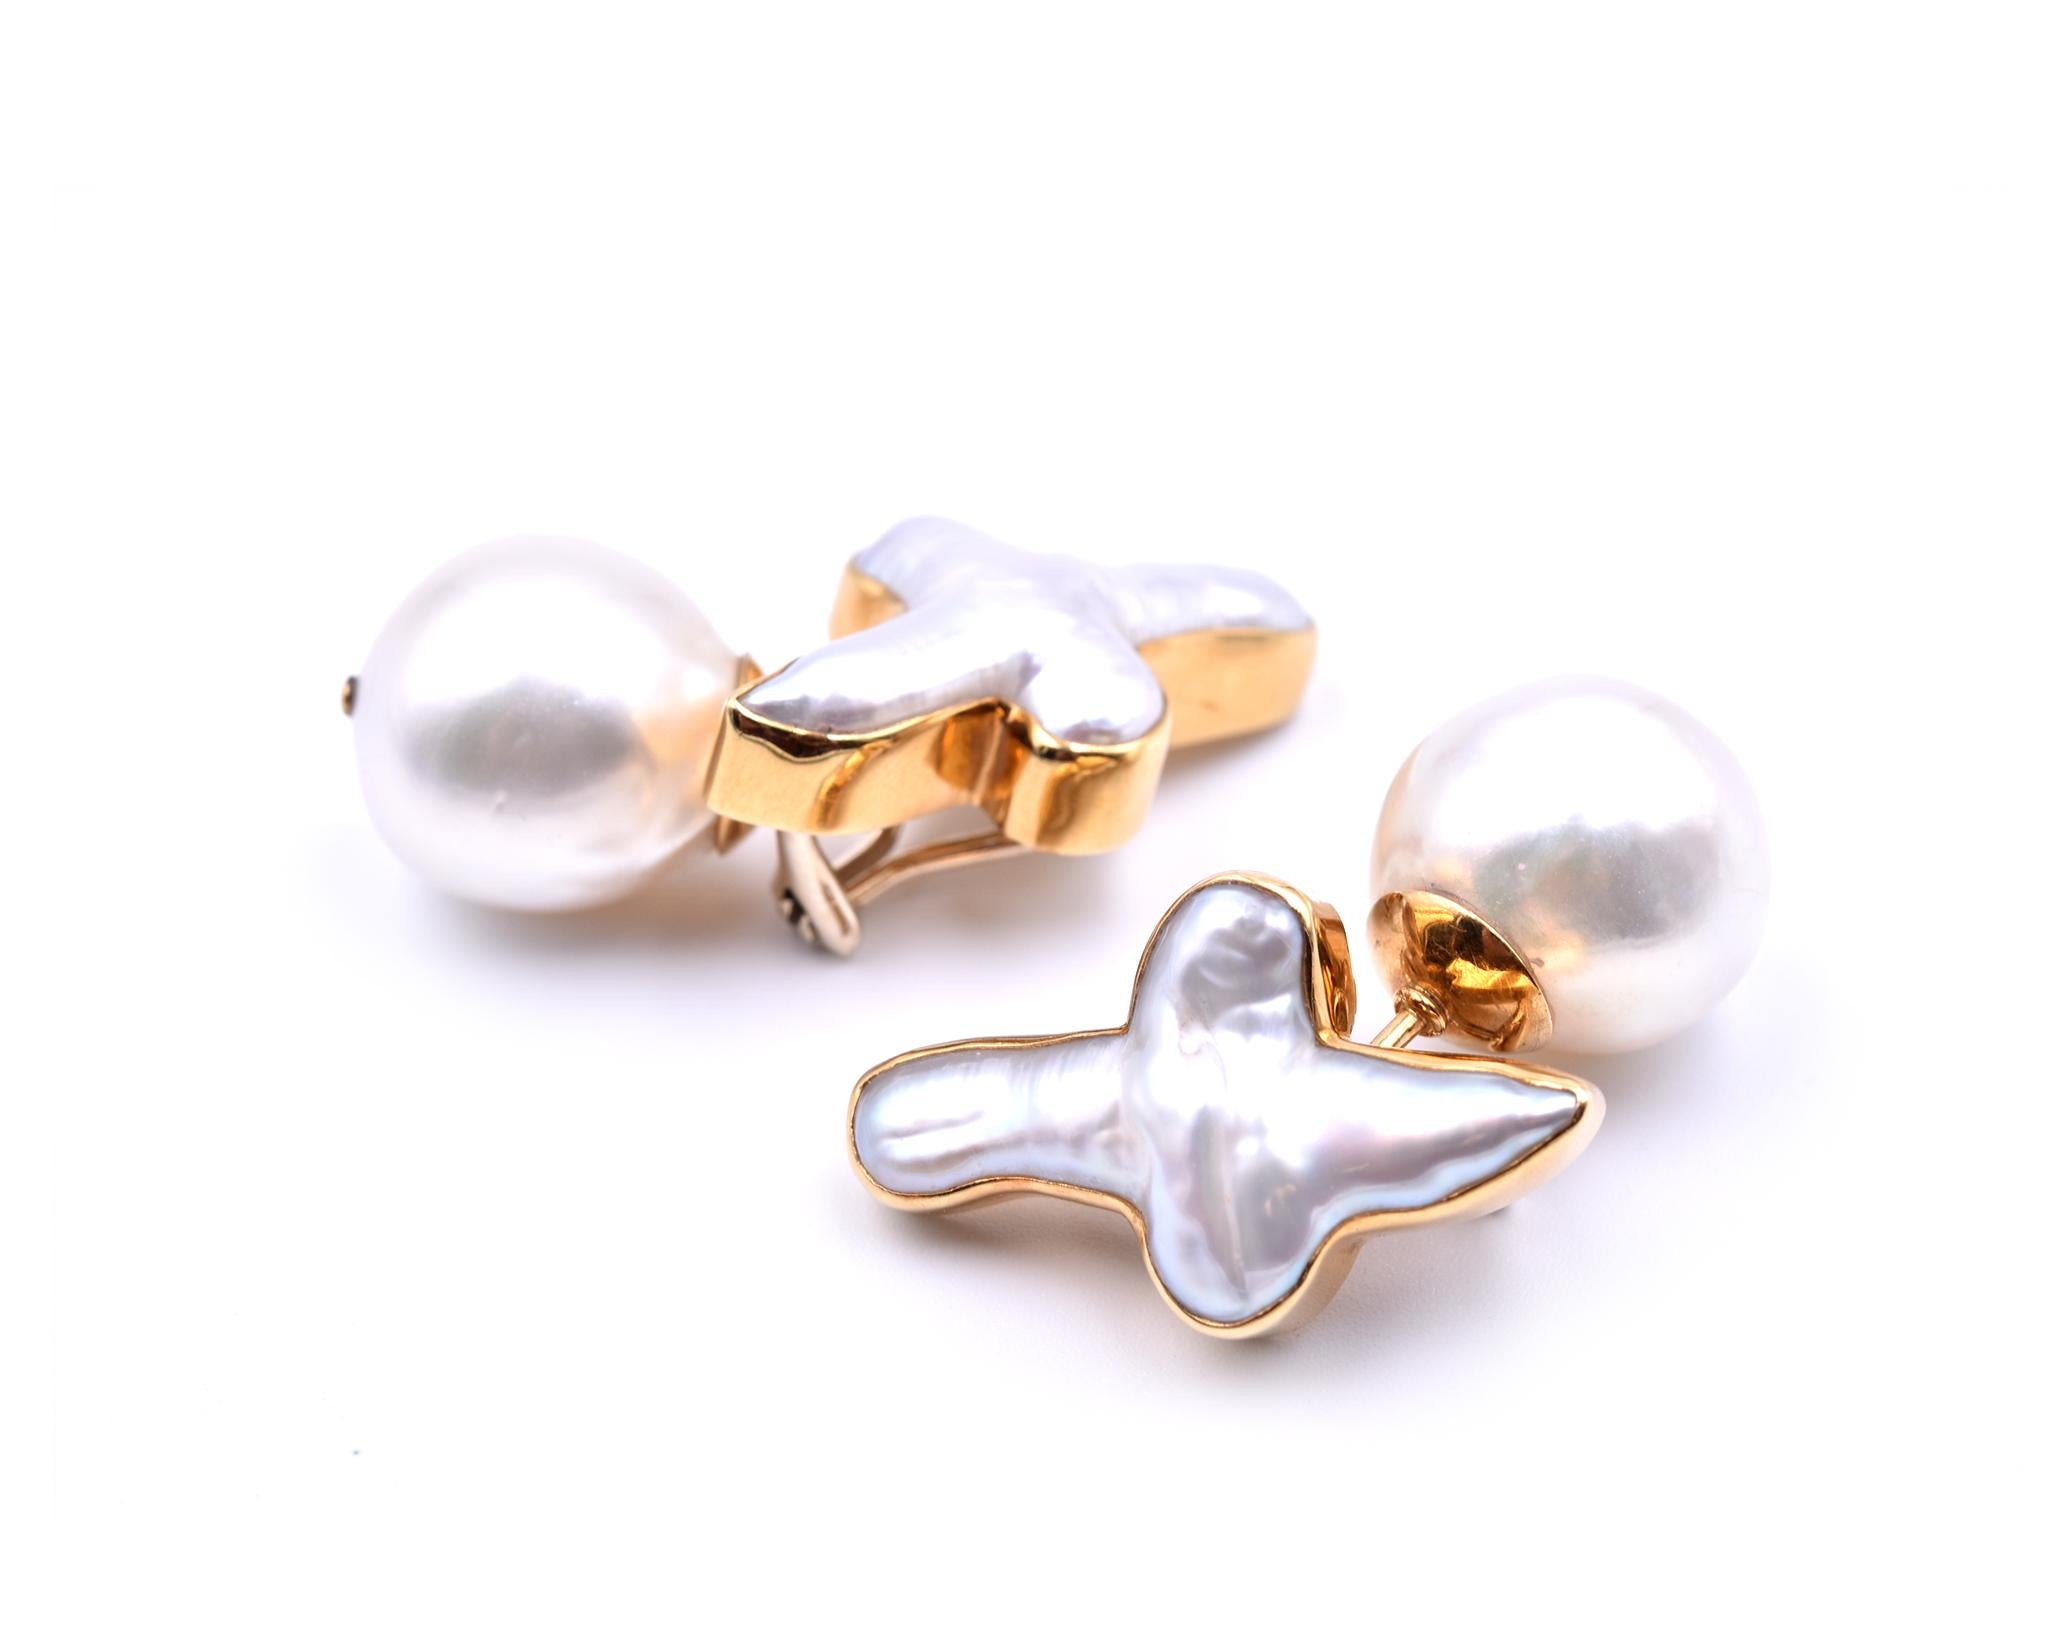 Designer: custom design
Material: 18k yellow gold
Pearls: semi round 15.2mm diameter
Fastenings: omega clips
Dimensions: each earring is 1 1/2-inch long and 1/2-inch wide 
Weight: 22.53 grams
